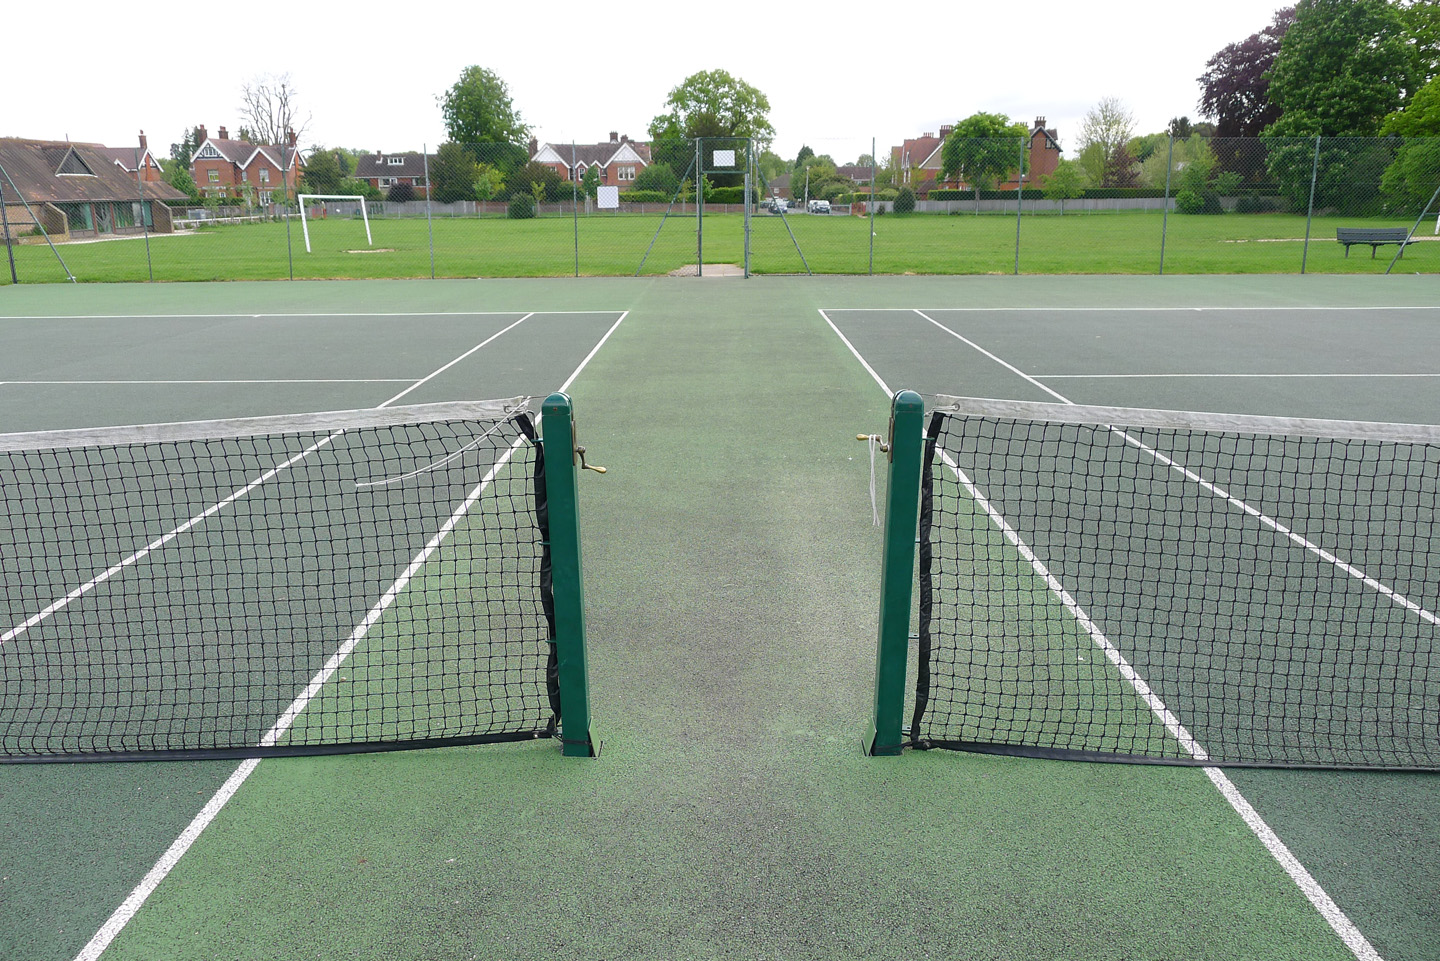 Petersfield s free tennis courts go digital to attract new players